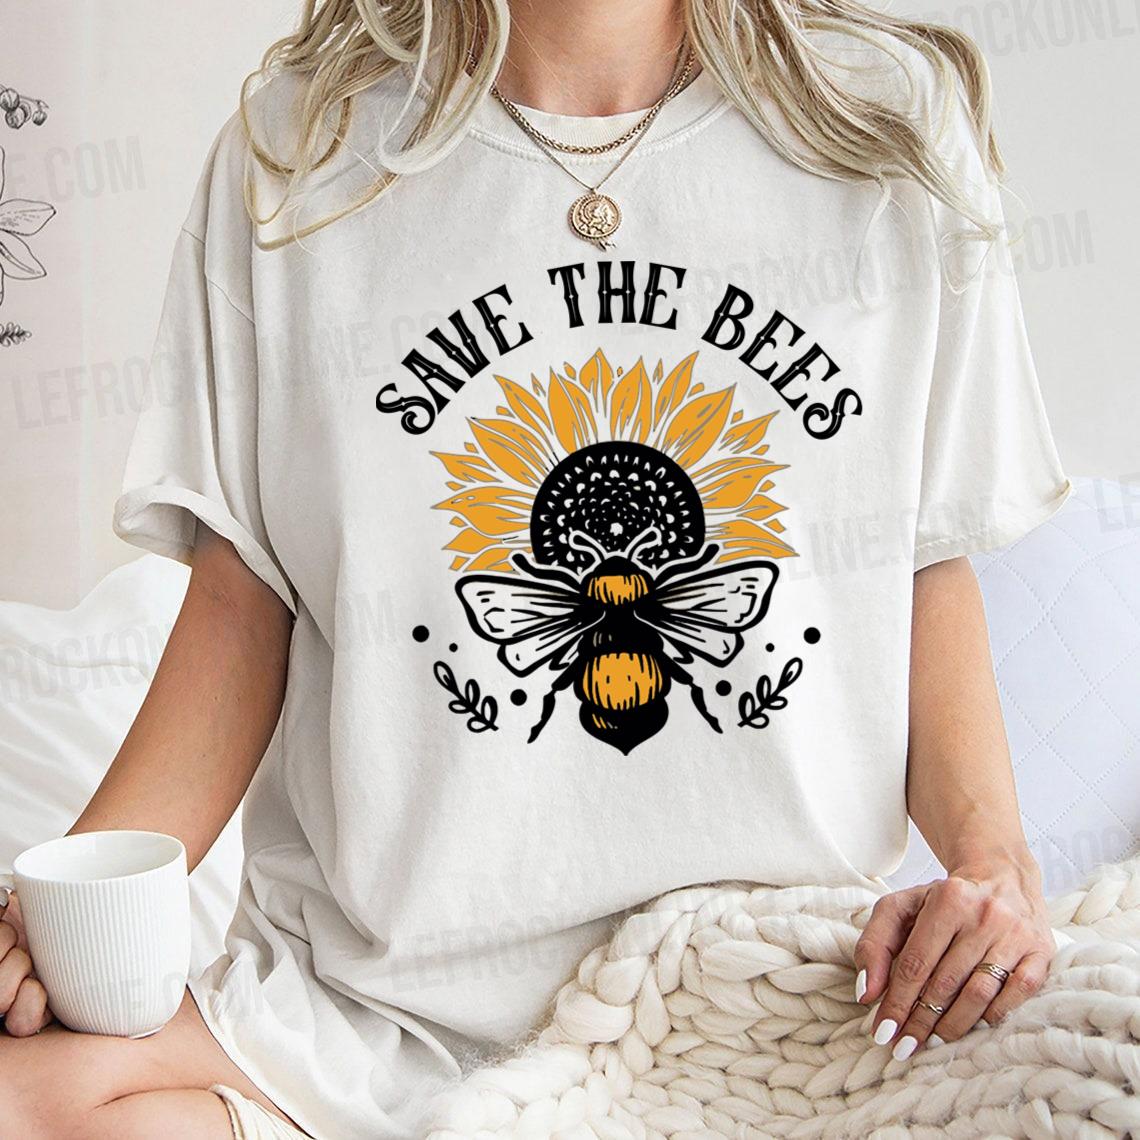 The Bee & Sunflower With Save The Bees Quote Save The Bees Shirt